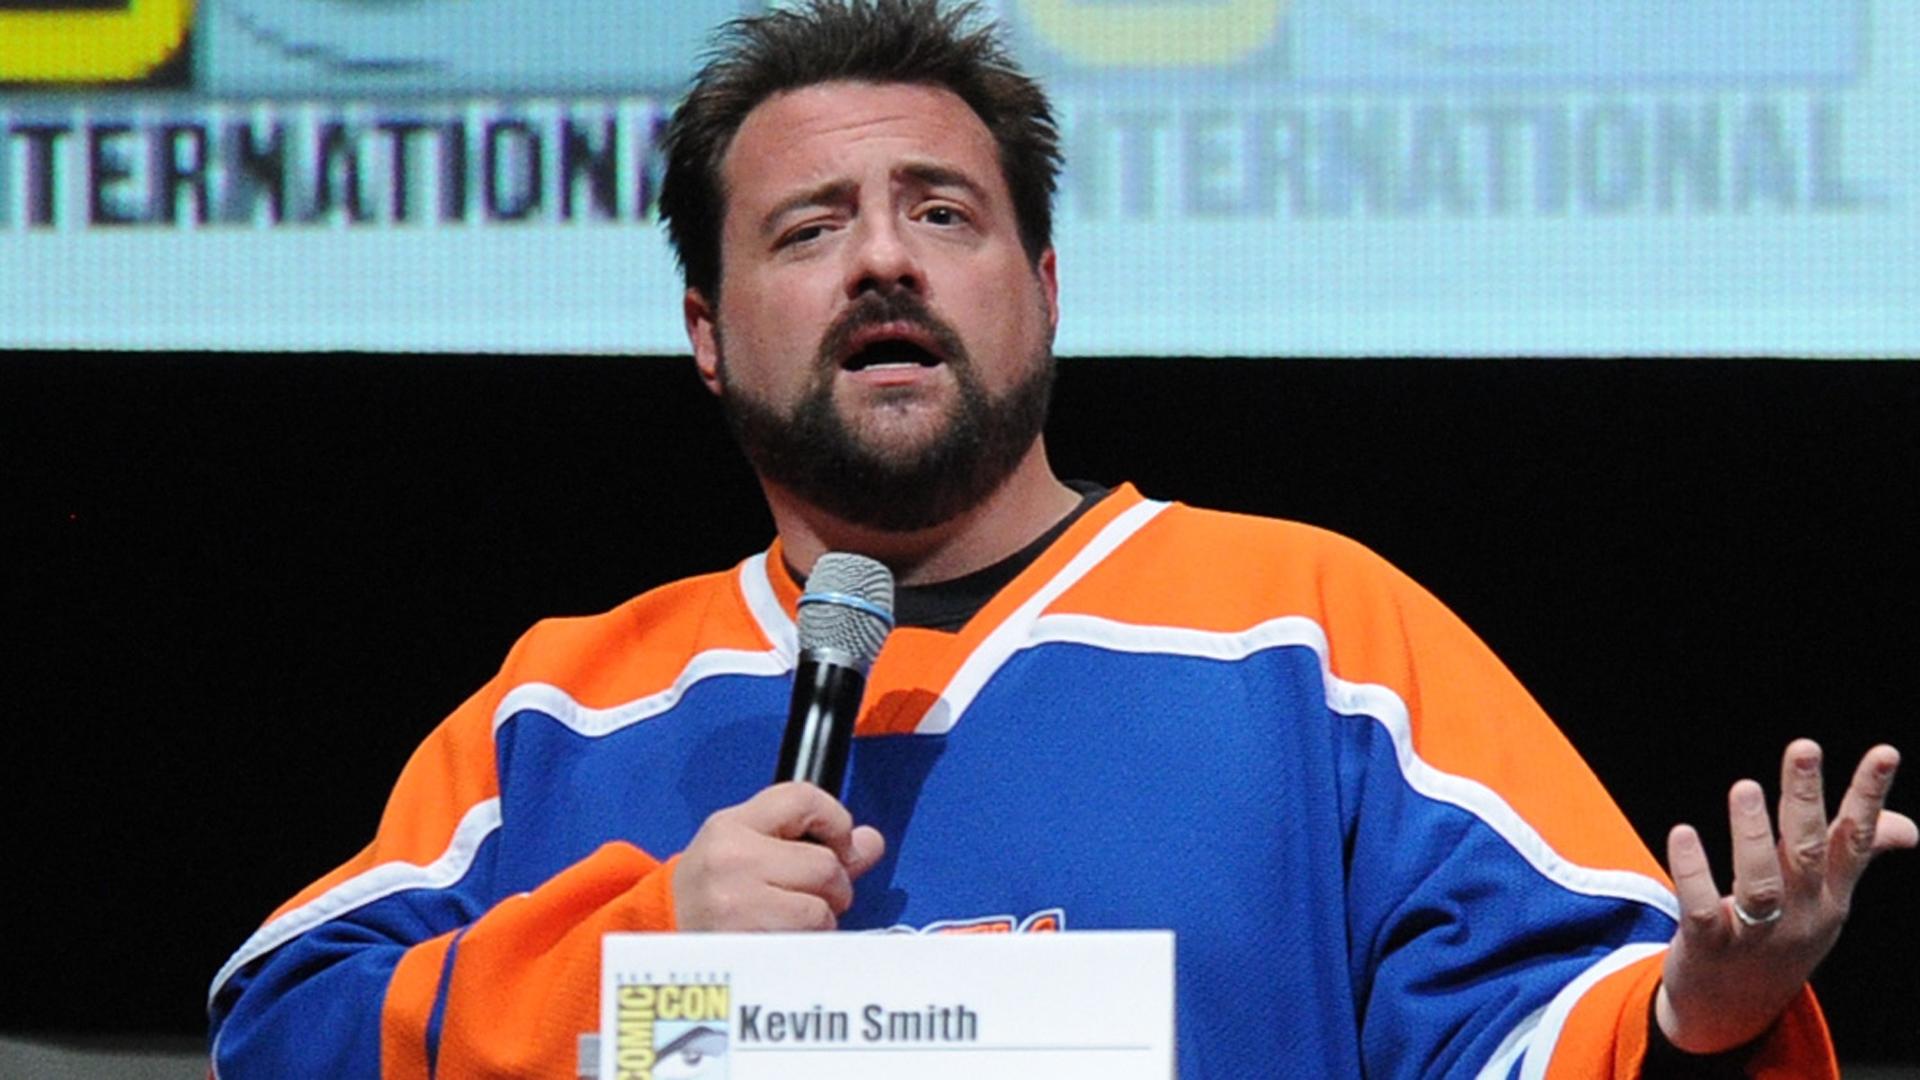 AMC To Develop Scripted Comedy, Latenight Project with Kevin Smith